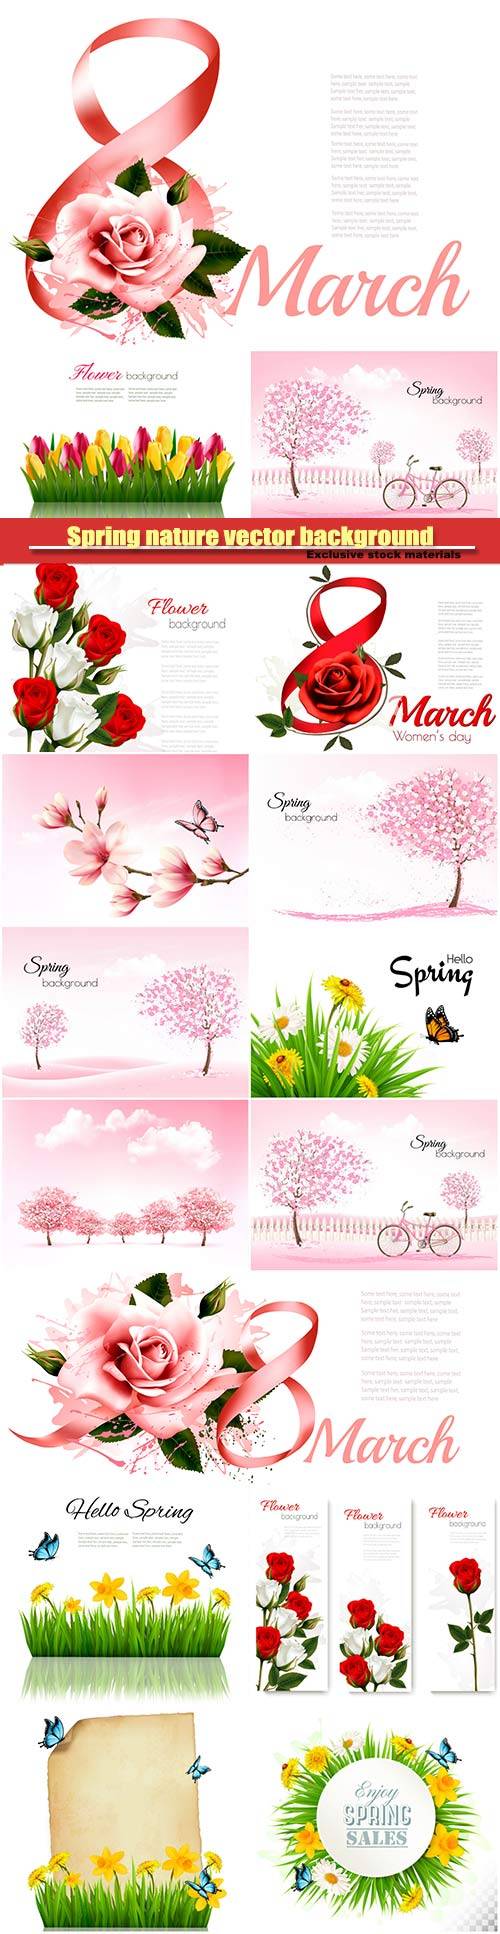 8th March illustration with rose, women's day, spring nature vector backgr ...